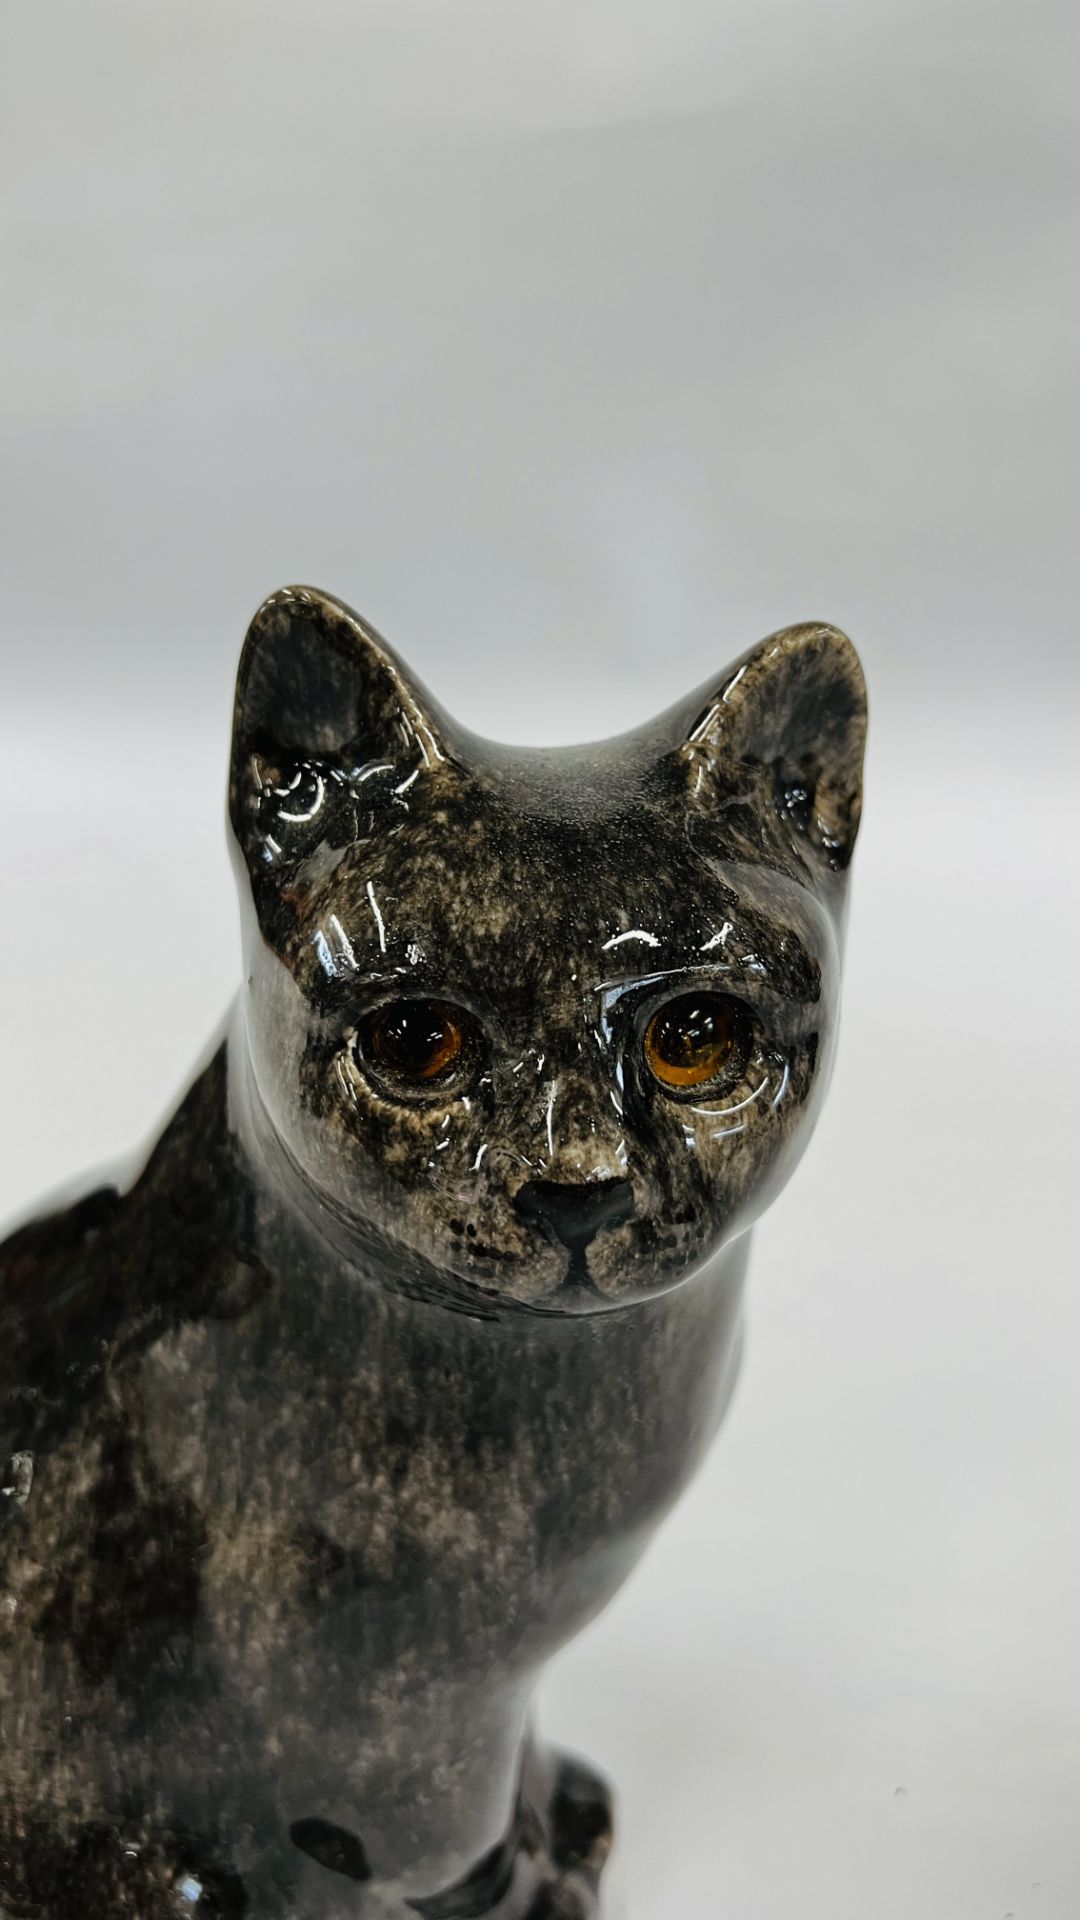 A HANDCRAFTED WINSTANLEY NO.4 SEATED CAT FIGURE - HEIGHT 24CM. - Image 2 of 6